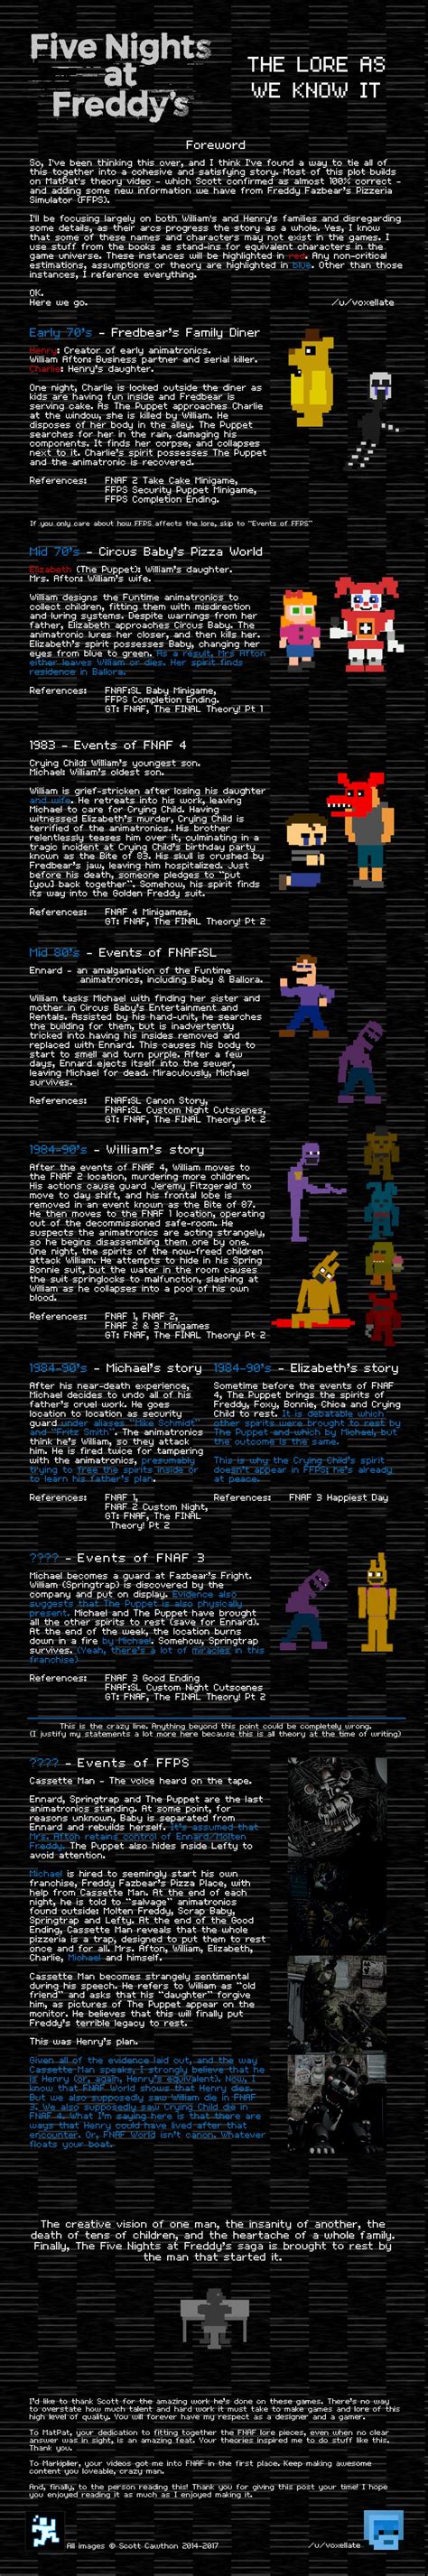 Fnaf lore copy and paste - The main series of FNAF has a lot of lore and narrative, here's the breakdown. The Five Nights At Freddy's games are successful at generating fear combined with stress and anxiety. Not many horror games revolve around a management mechanic, which is one of the reasons this series stands out. However, if you look beyond the scary …